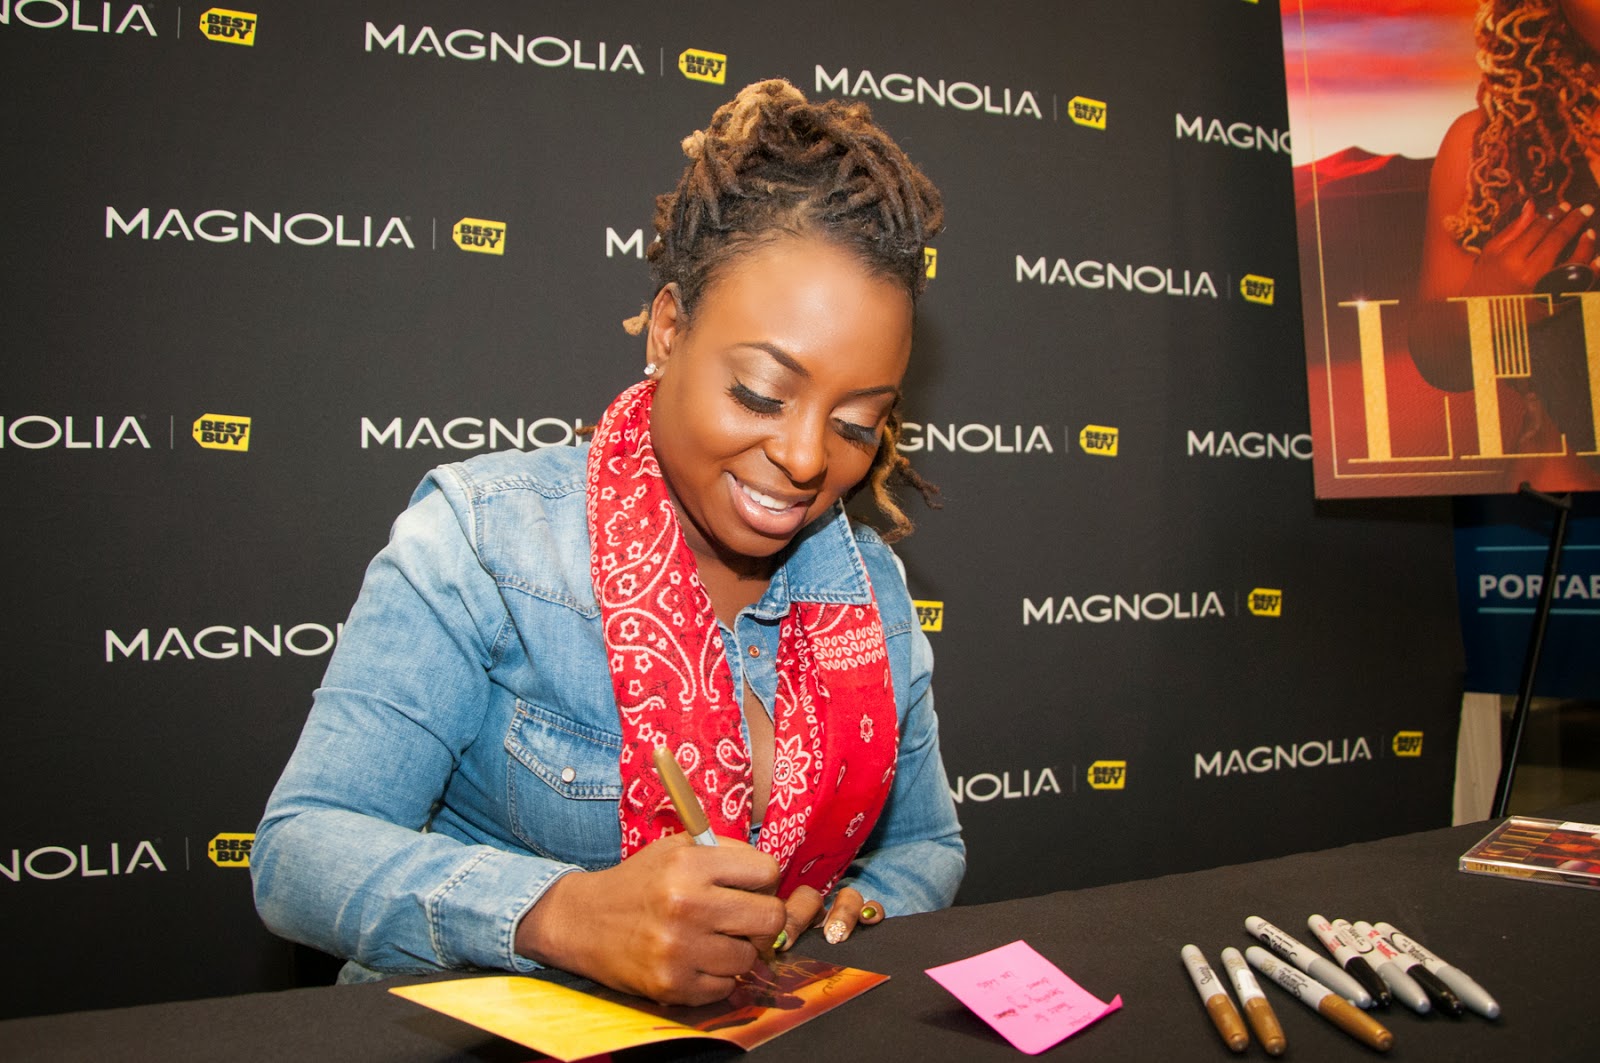 Ledisi signing her newest release The Truth, Autograph signing, Magnolia Theater Best Buy